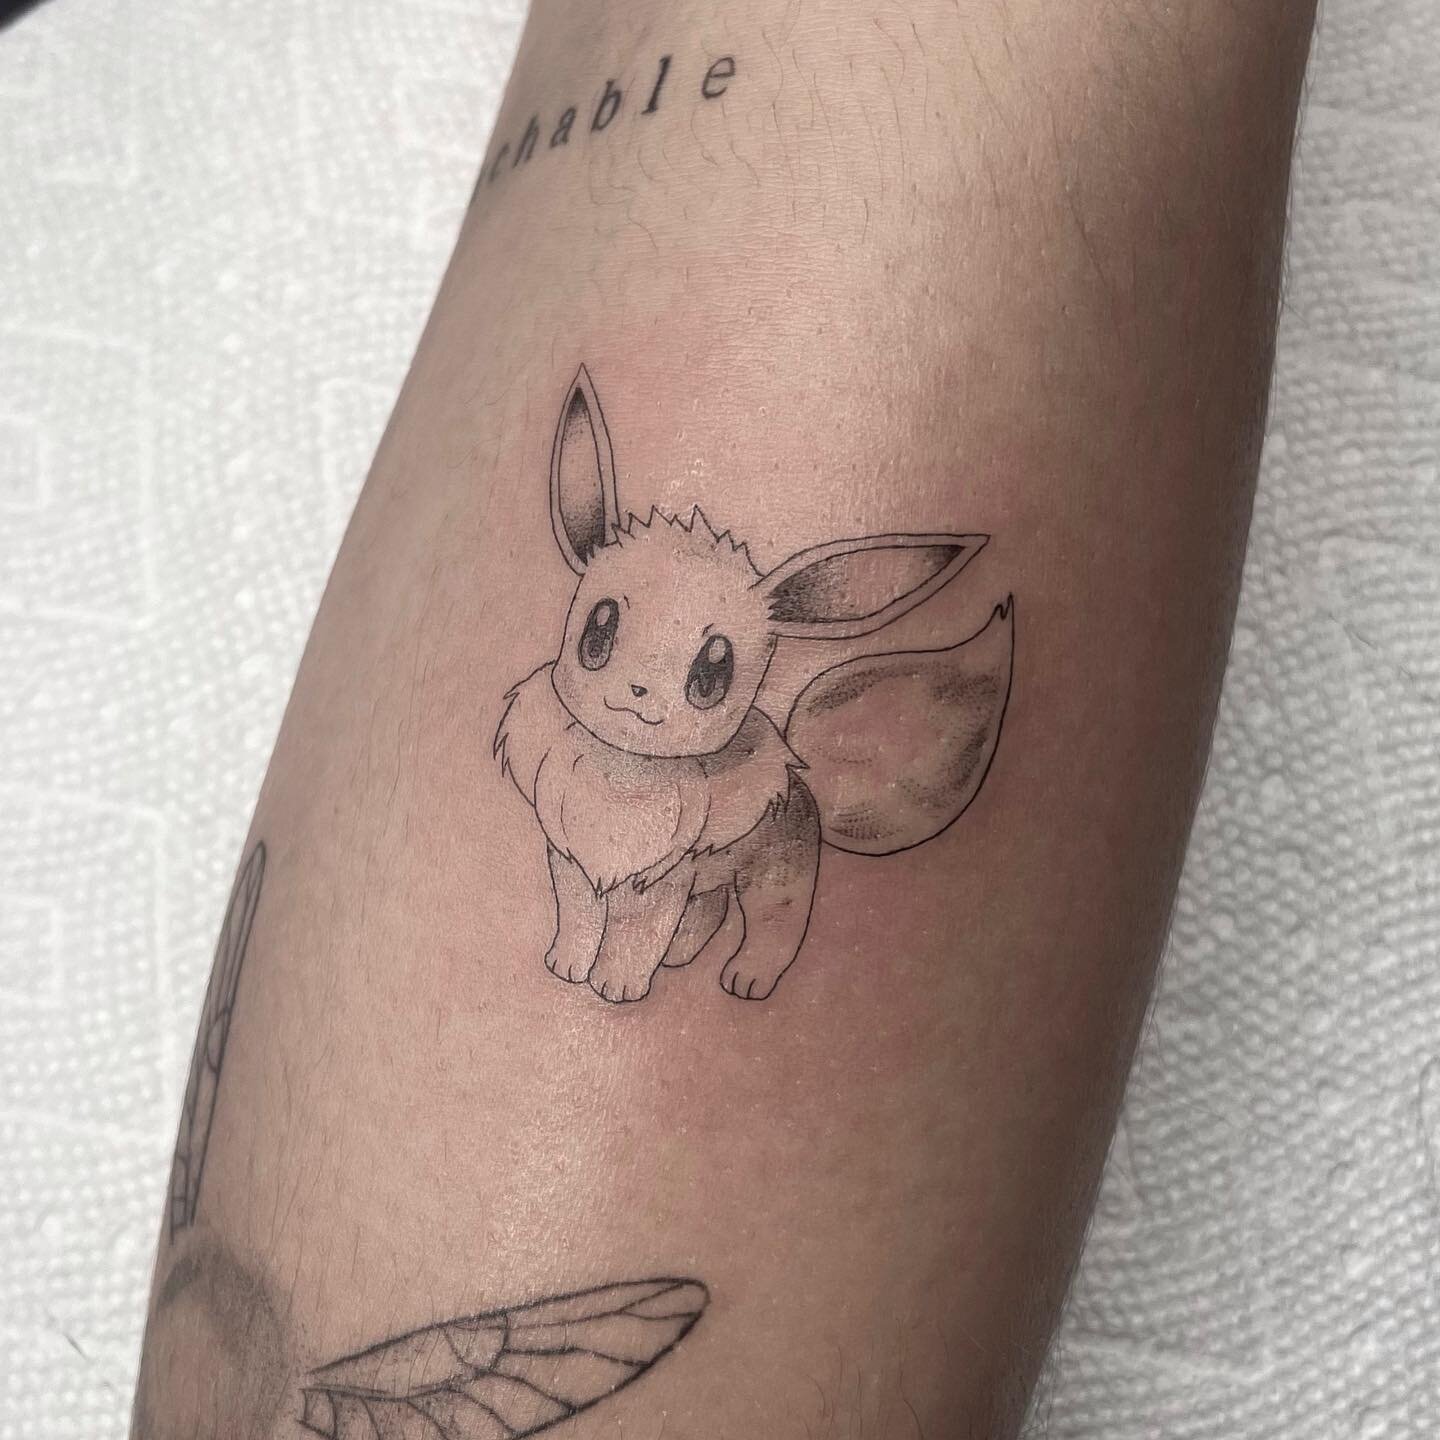 Loved doing this little Eevee, 🤎✨Thank you so much for coming in Emily! 
.
.
#pokemontattoo #tattoo #eeveetattoo #eevee #finelinetattoo #animetattoo #cutetattoo #tattoo #tattooartist